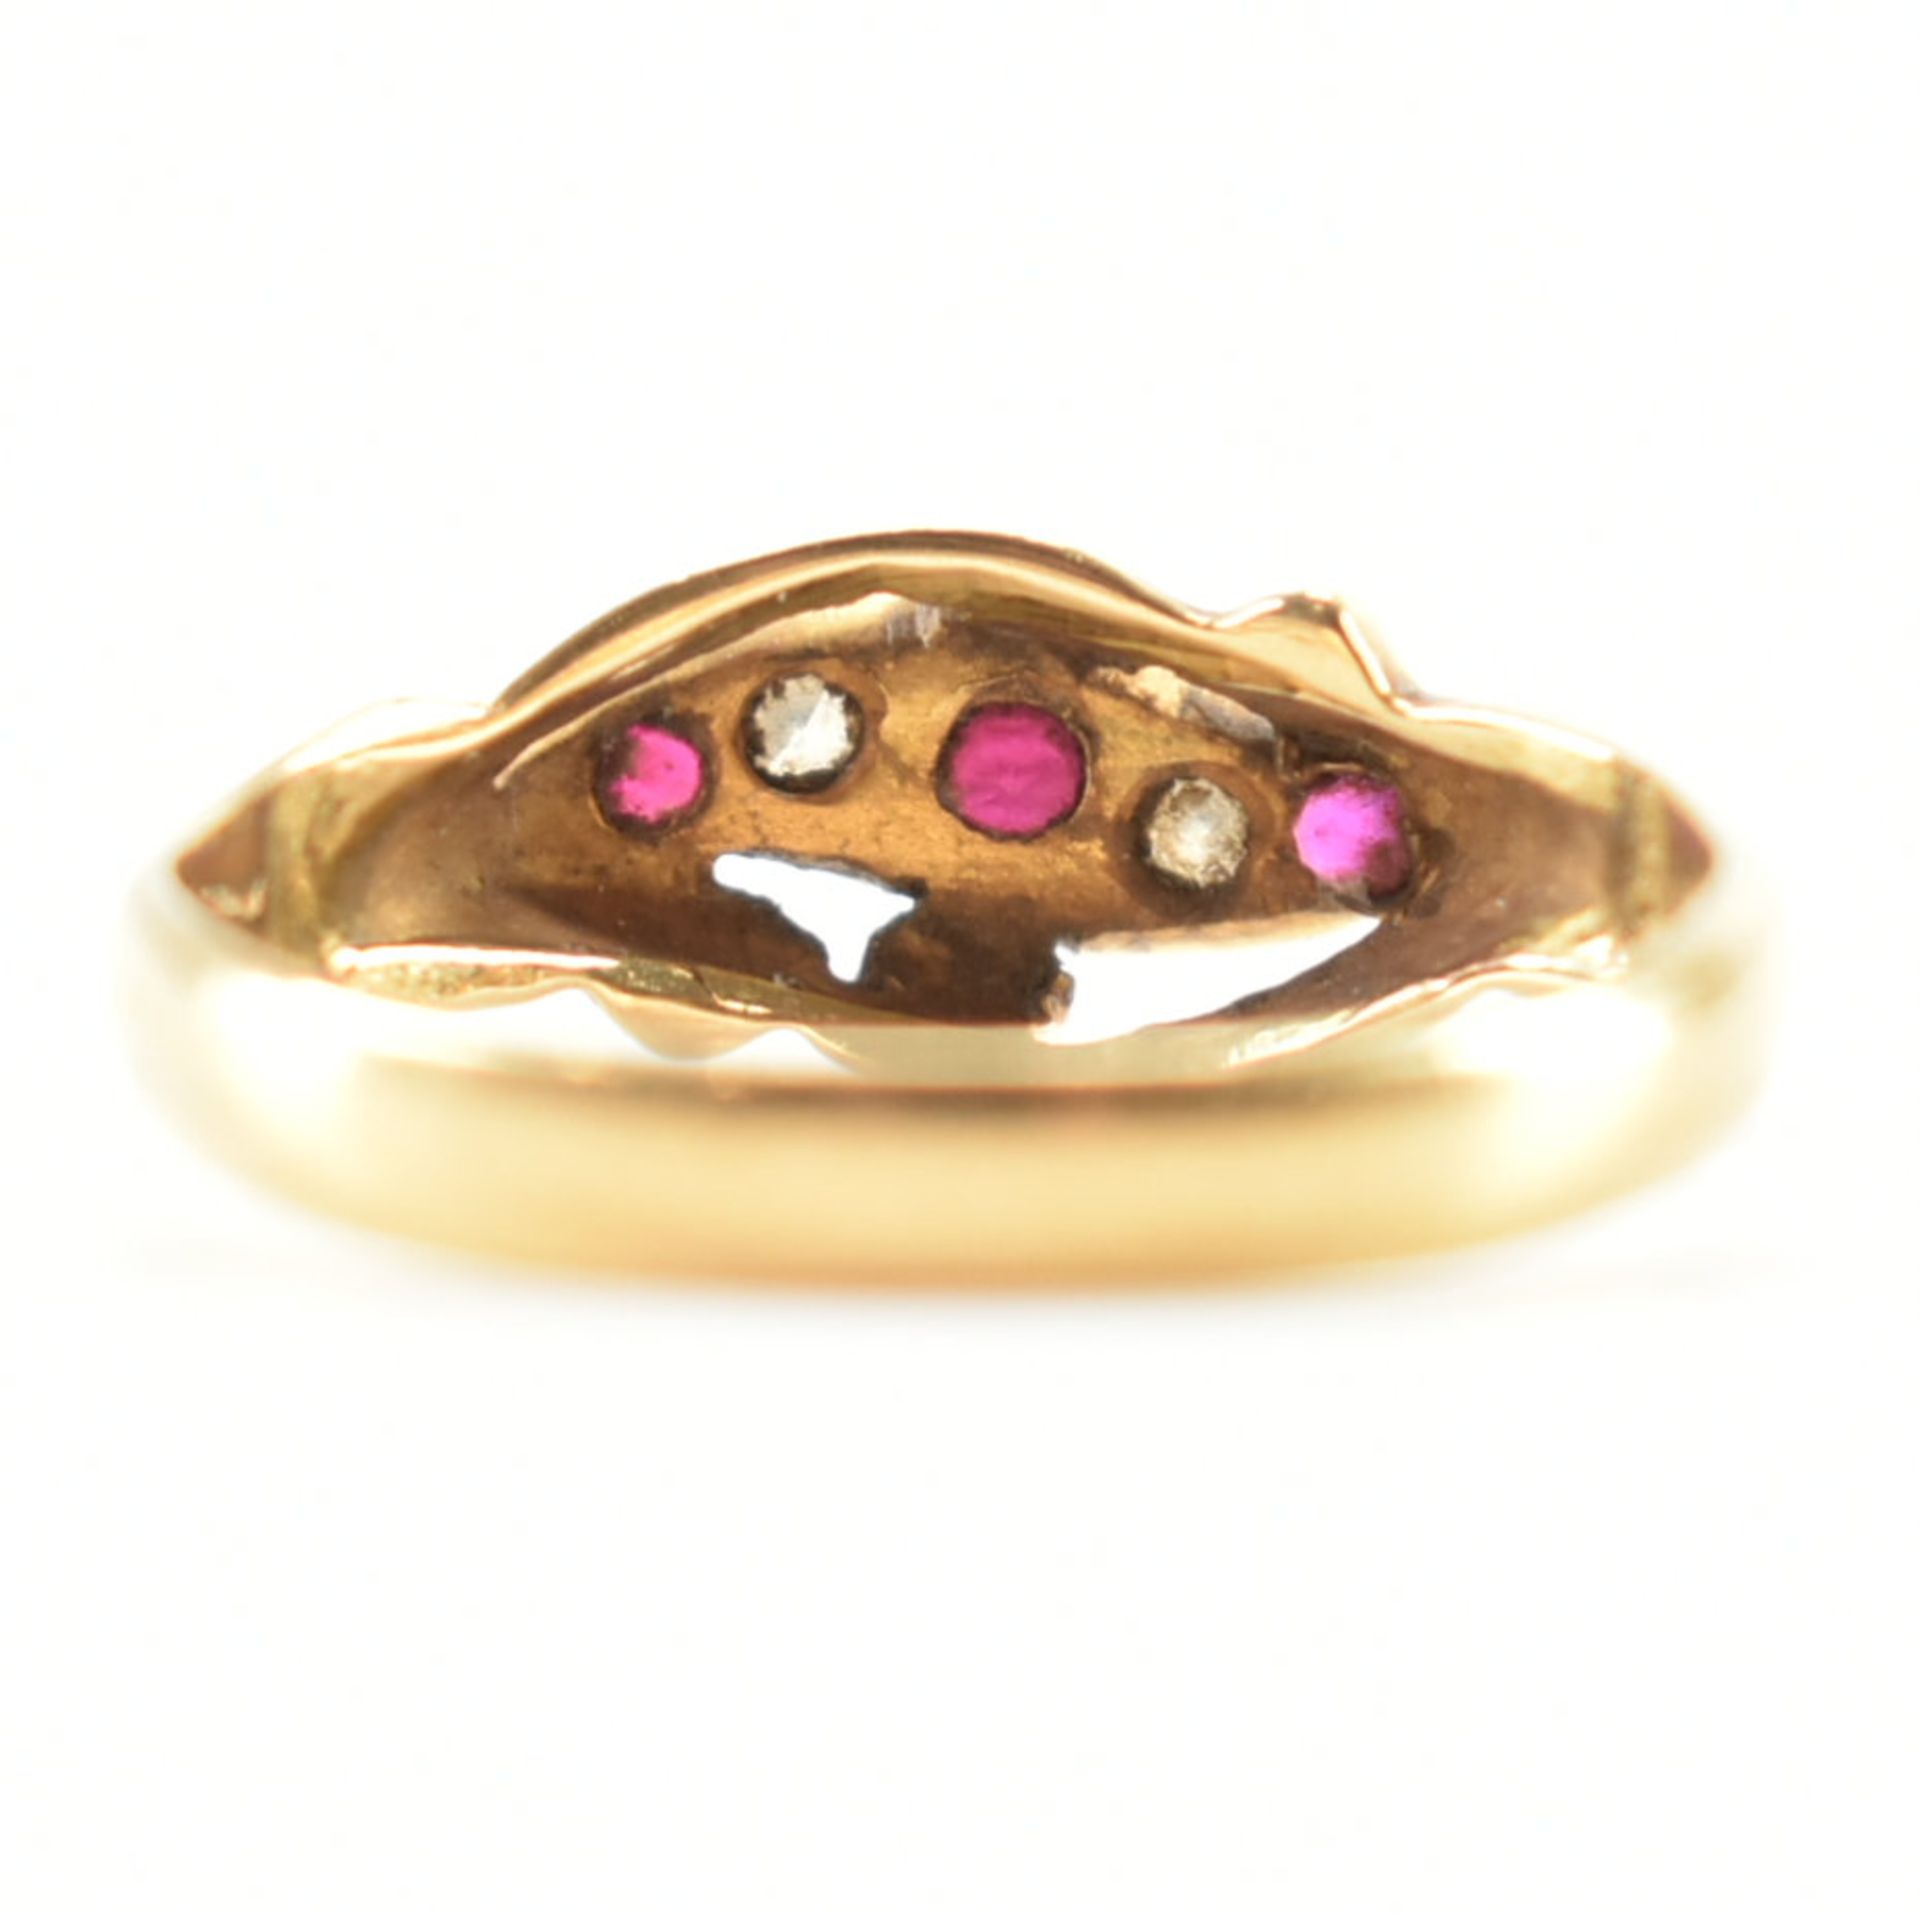 HALLMARKED 18CT GOLD SPINEL & DIAMOND RING - Image 4 of 8